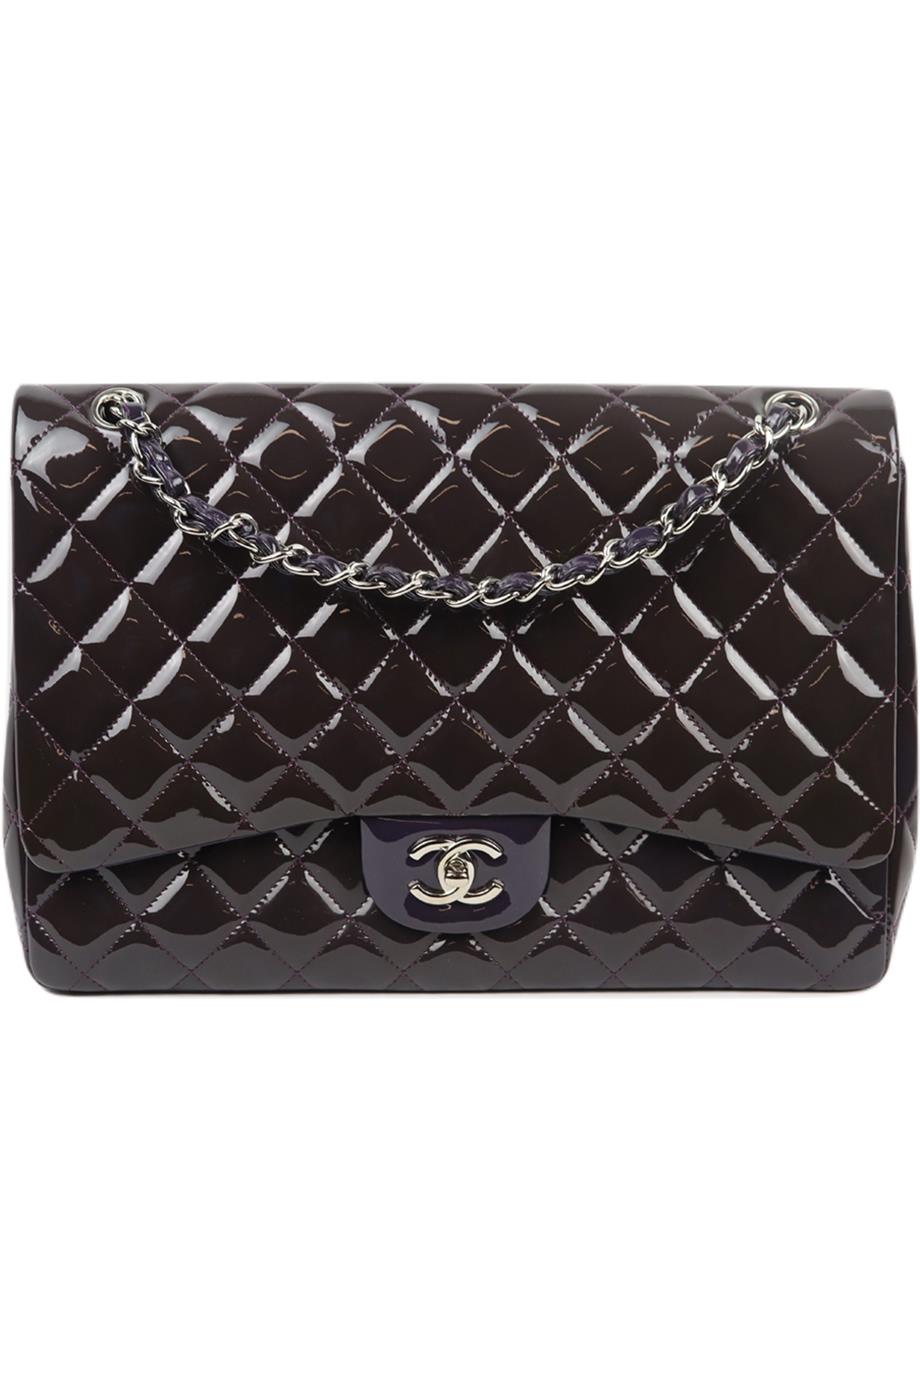 CHANEL 2010 MAXI CLASSIC QUILTED PATENT LEATHER SINGLE FLAP SHOULDER BAG